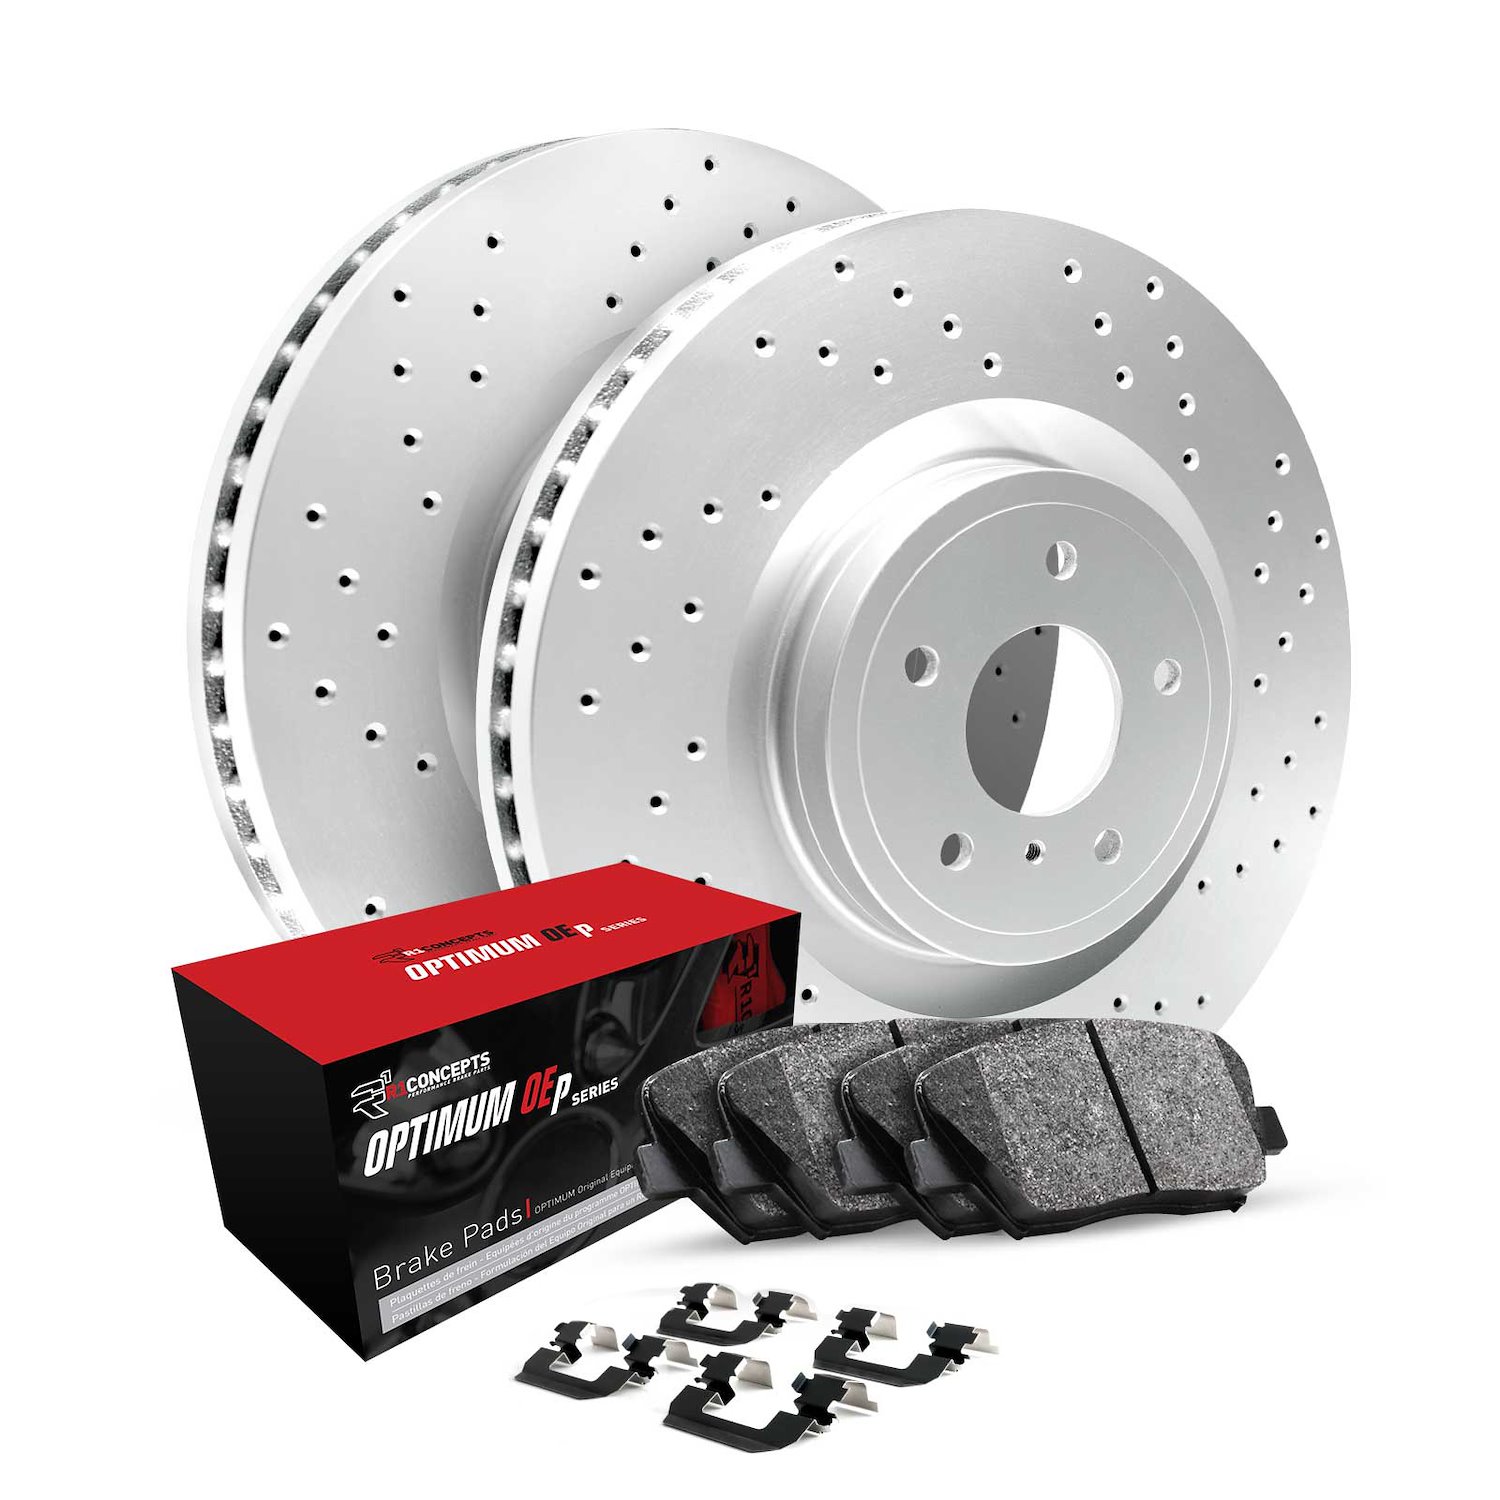 GEO-Carbon Drilled Brake Rotor Set w/Optimum OE Pads & Hardware, Fits Select Fits Multiple Makes/Models, Position: Rear